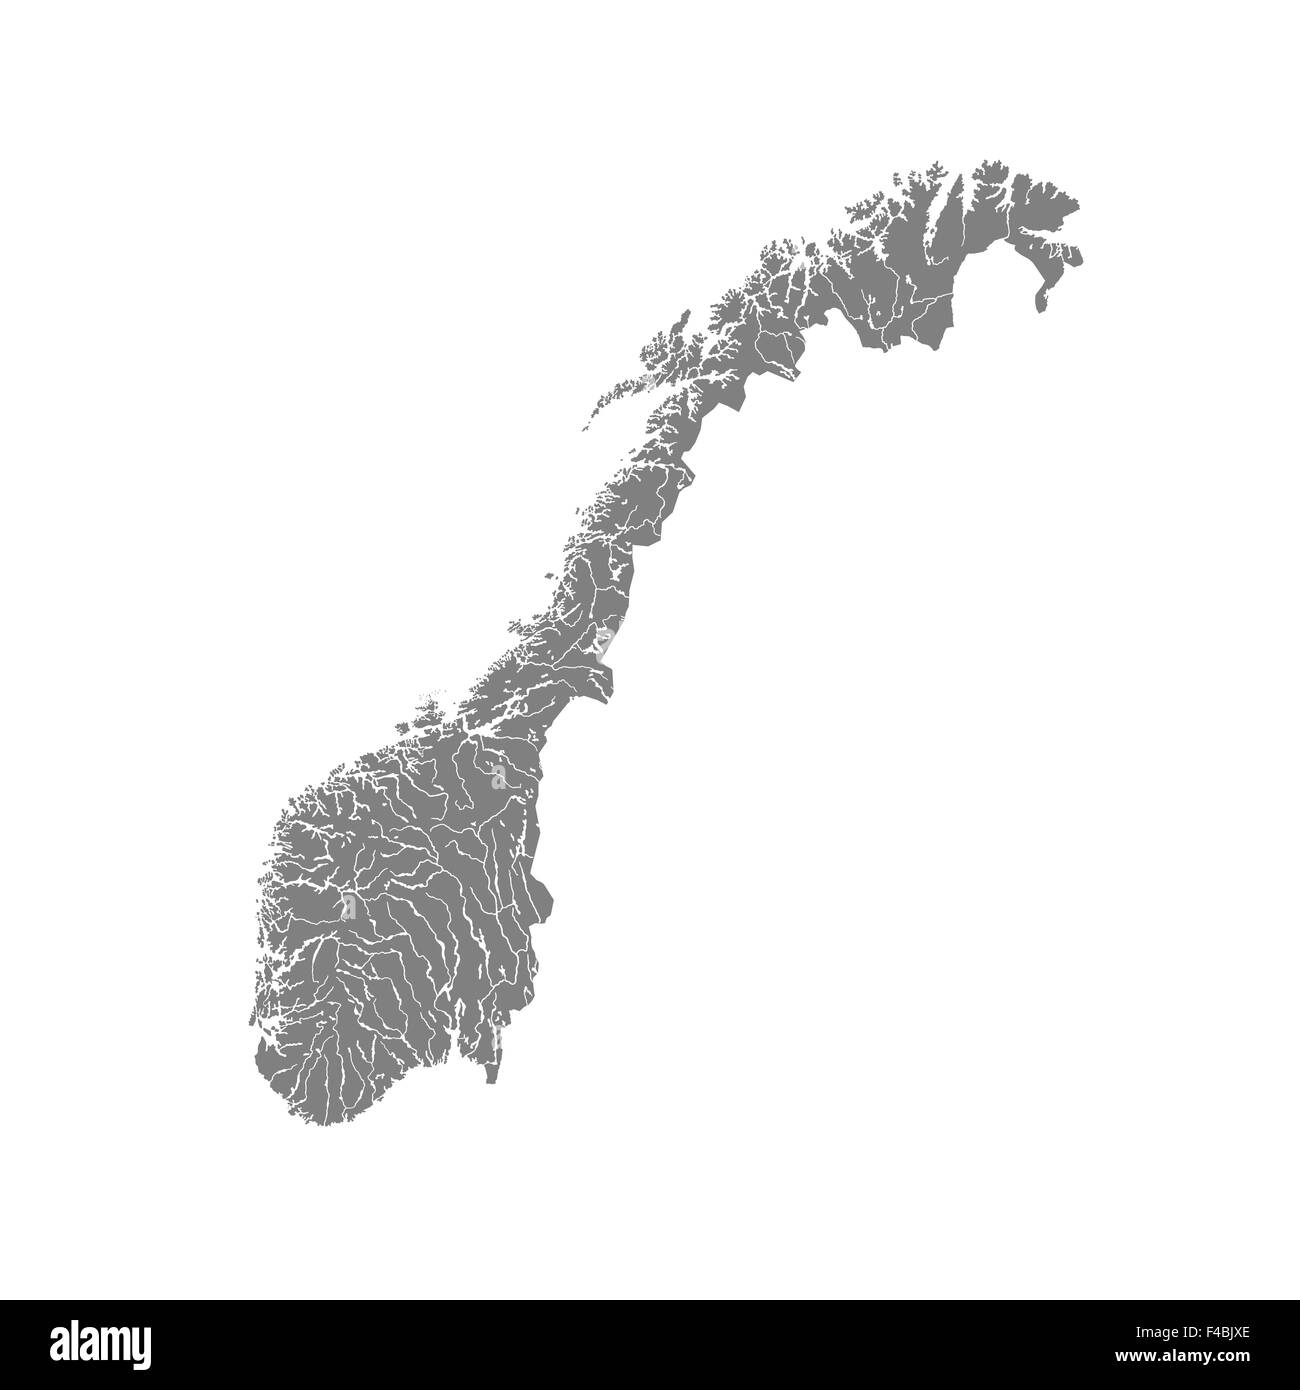 Map of Norway with rivers and lakes. Stock Photo